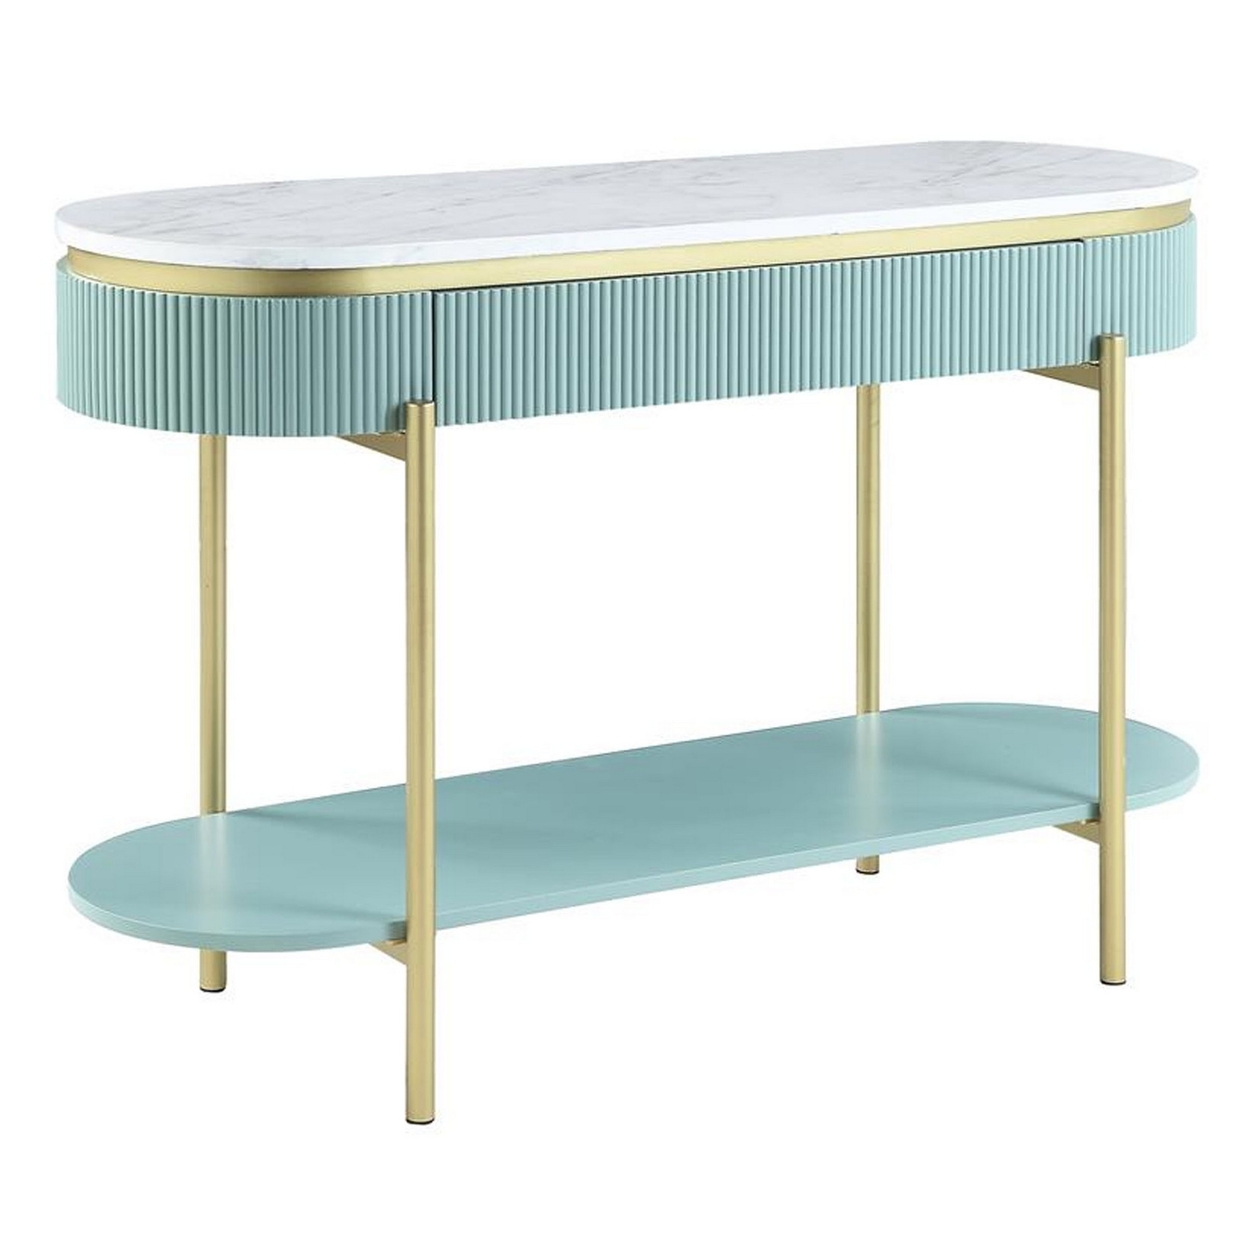 Ville 48 Inch Sofa Console Table, White Faux Marble Top, Teal Reeded Edge- Saltoro Sherpi